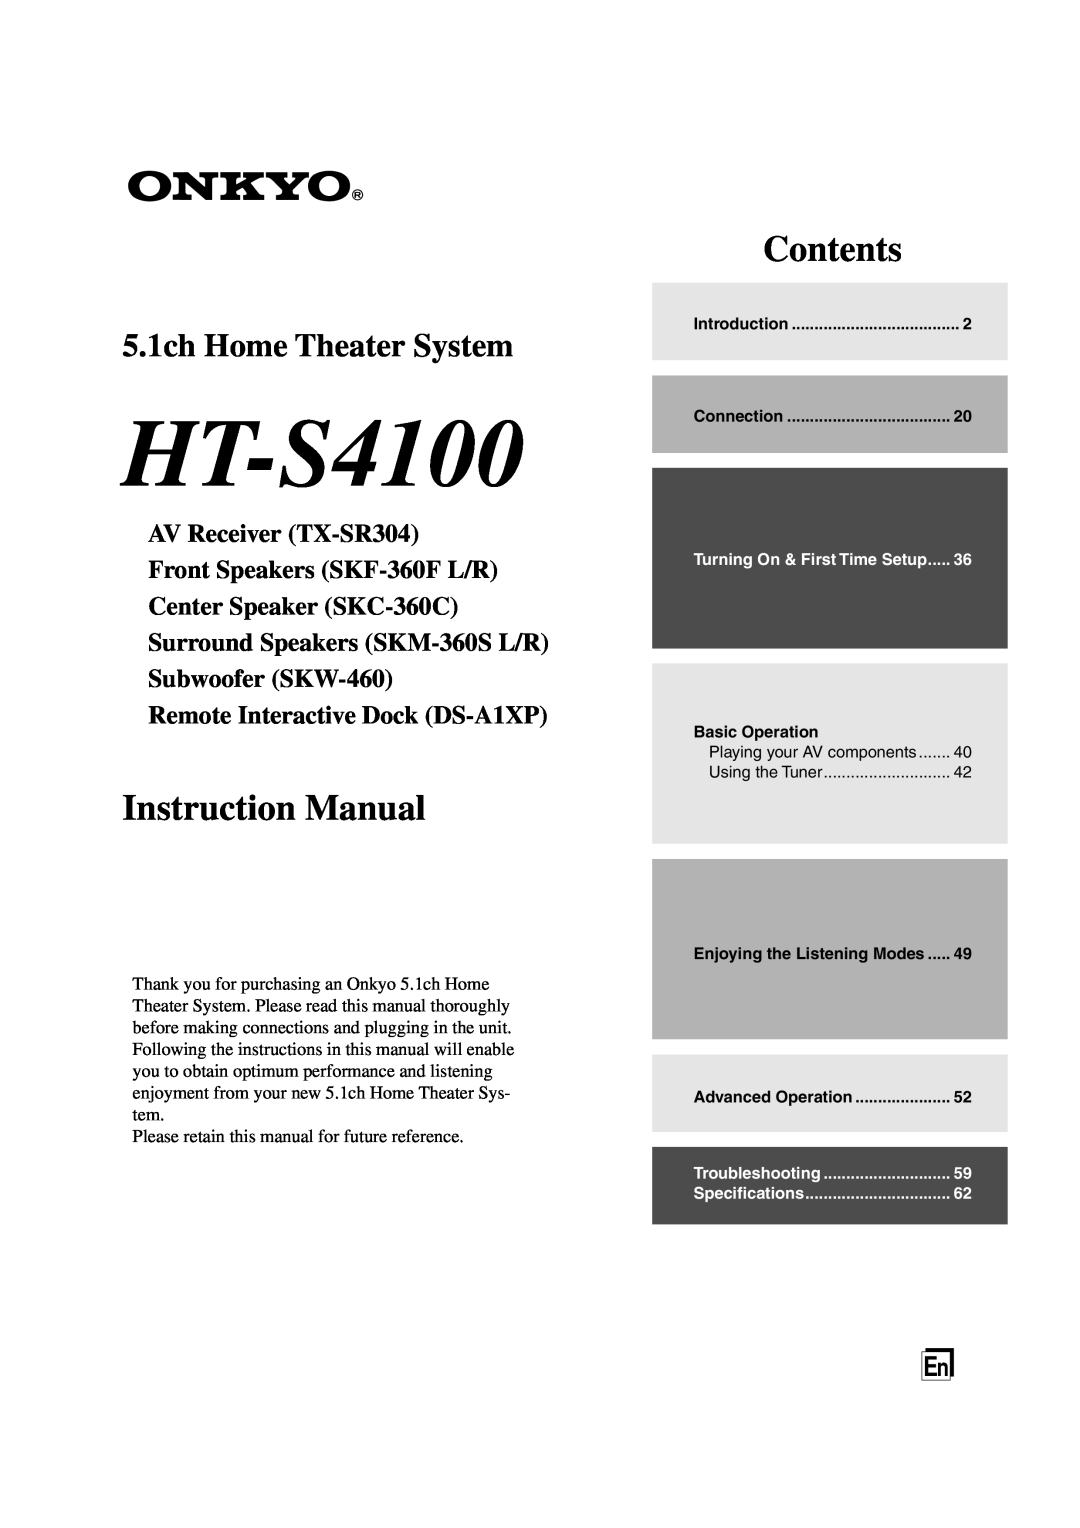 Onkyo HT-S4100 instruction manual Contents, 5.1ch Home Theater System, AV Receiver TX-SR304 Front Speakers SKF-360FL/R 